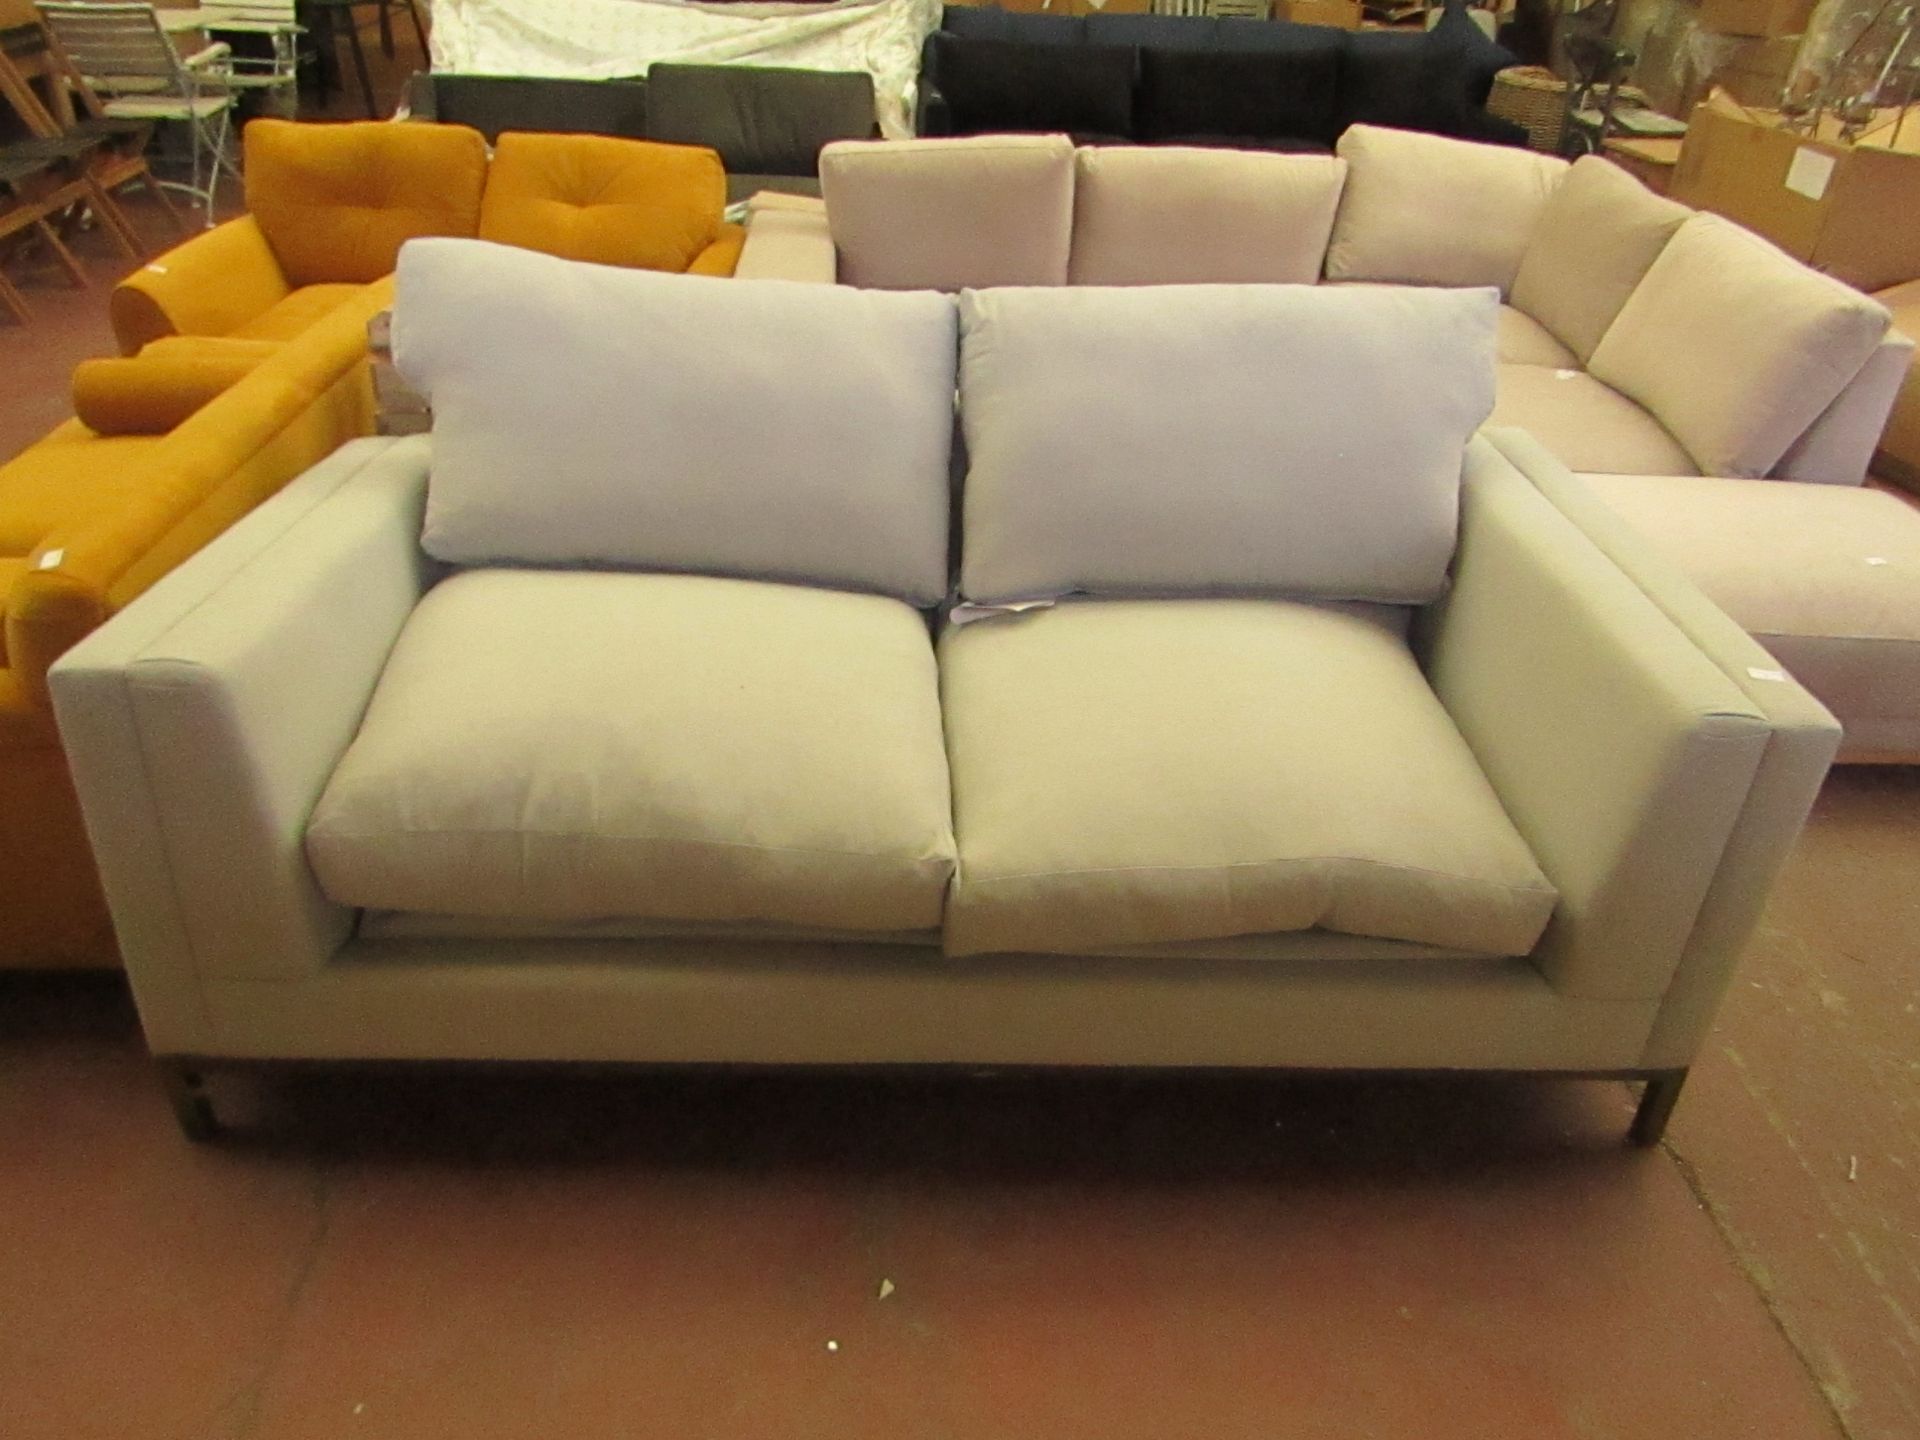 | 1X | COX AND COX THE DECO SOFA BED, UNUSED BUT MISSING A BACK LEG AND HAS A COUPLE OF DIRTY